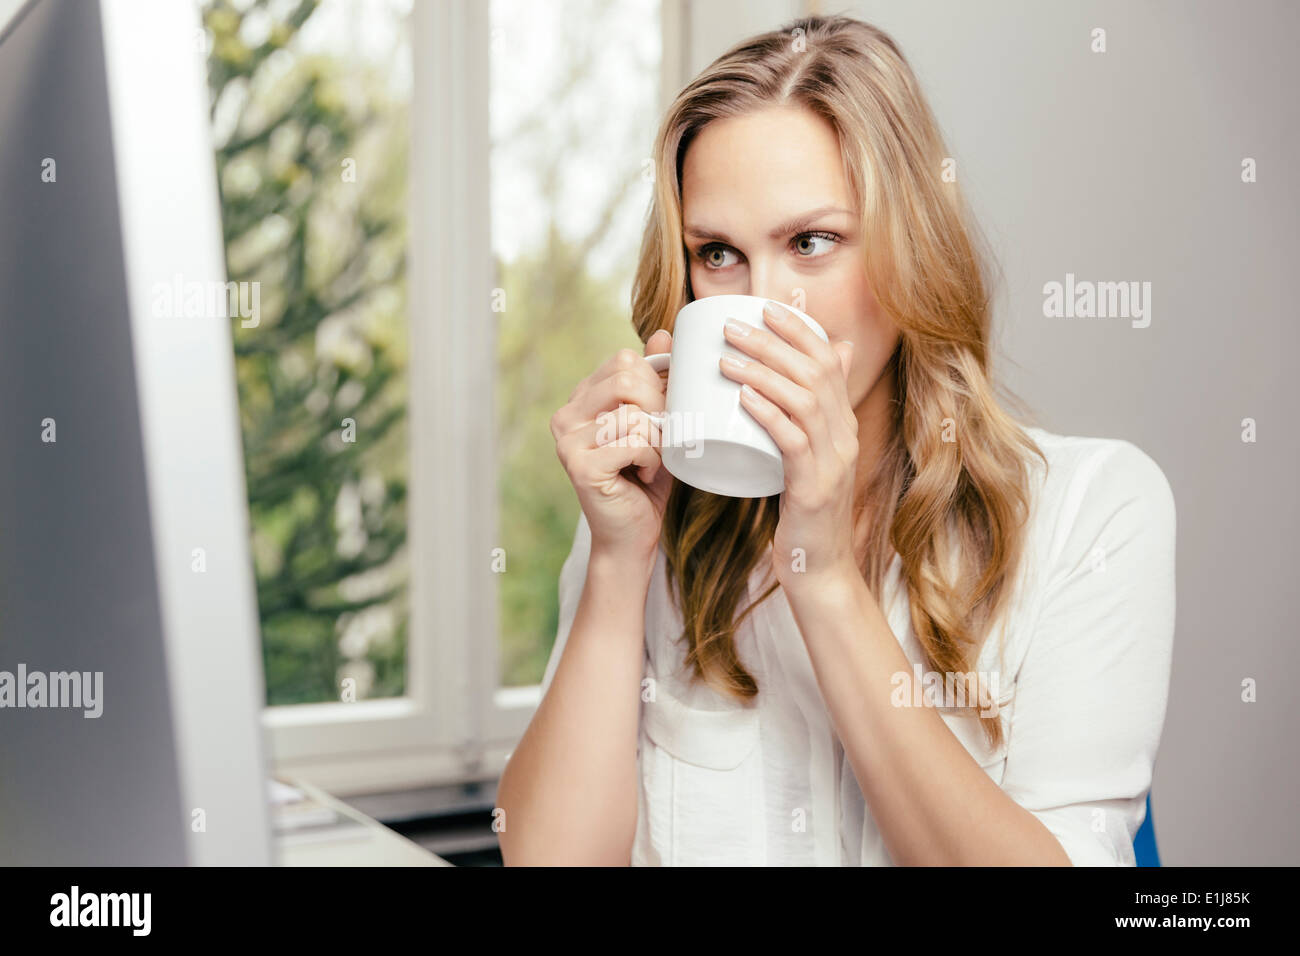 Blond young woman at desk drinking cup of coffee Stock Photo